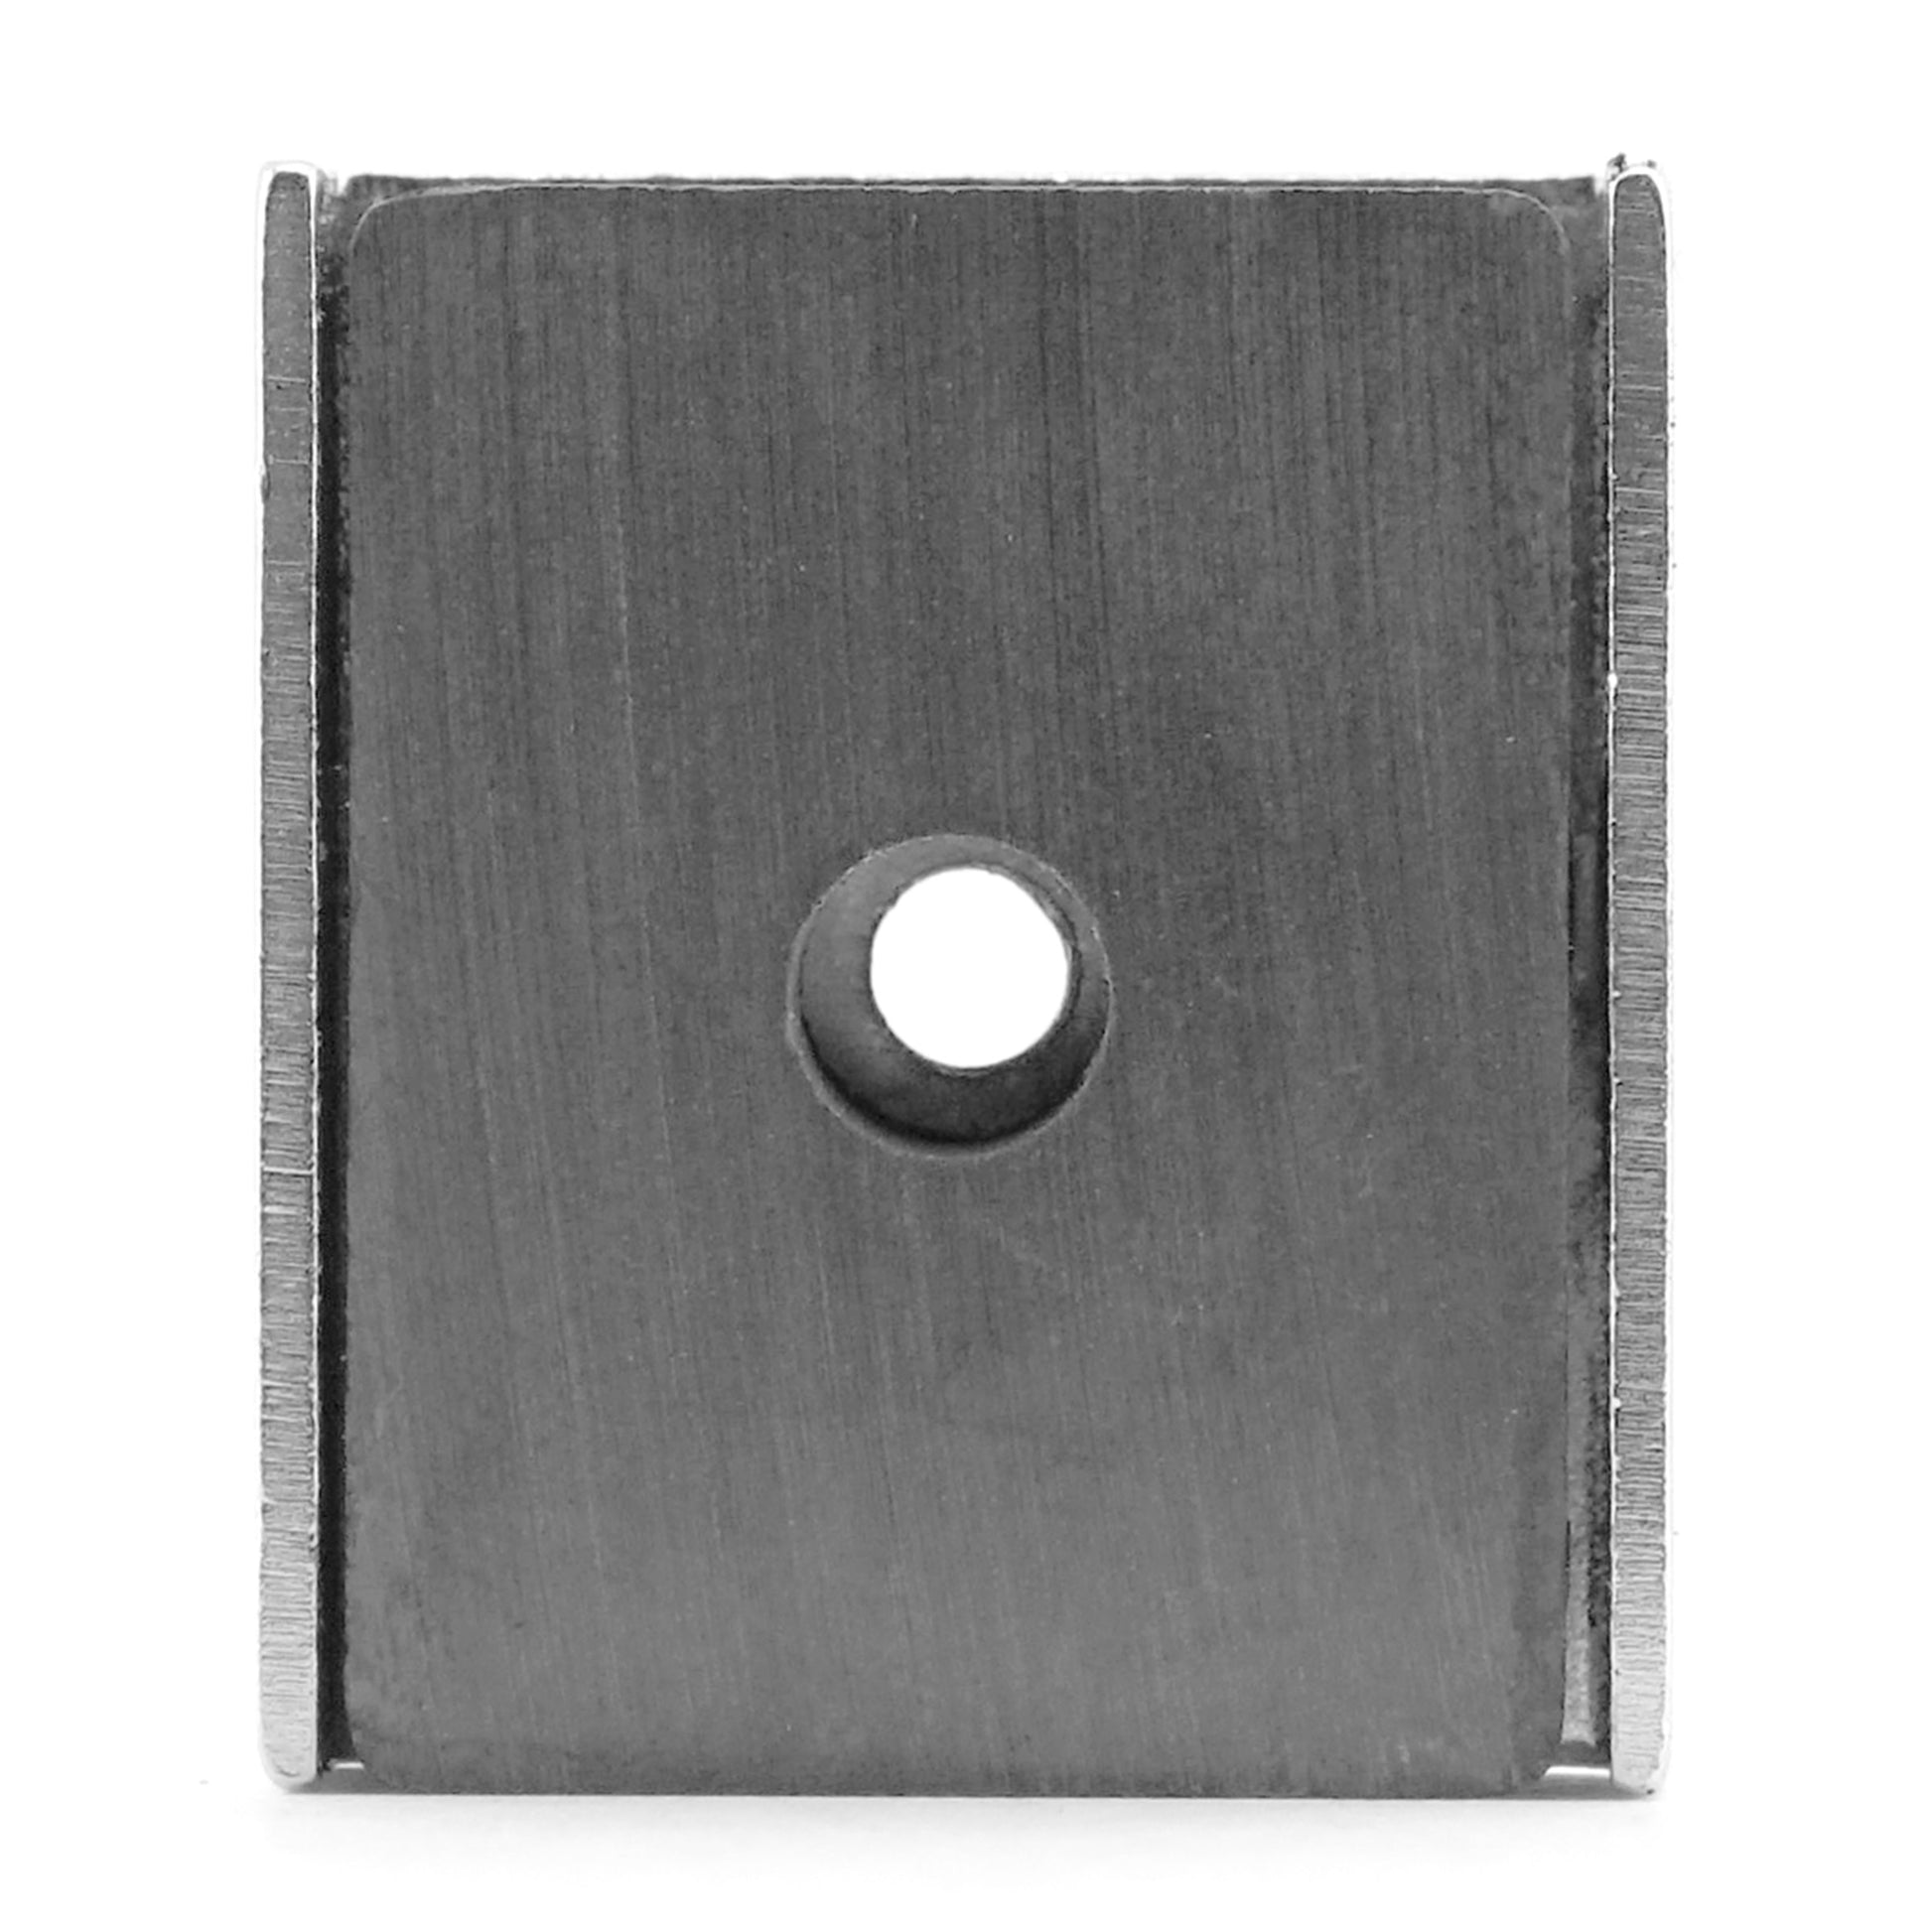 Load image into Gallery viewer, CA403 Ceramic Latch Magnet Channel Assembly - In Use